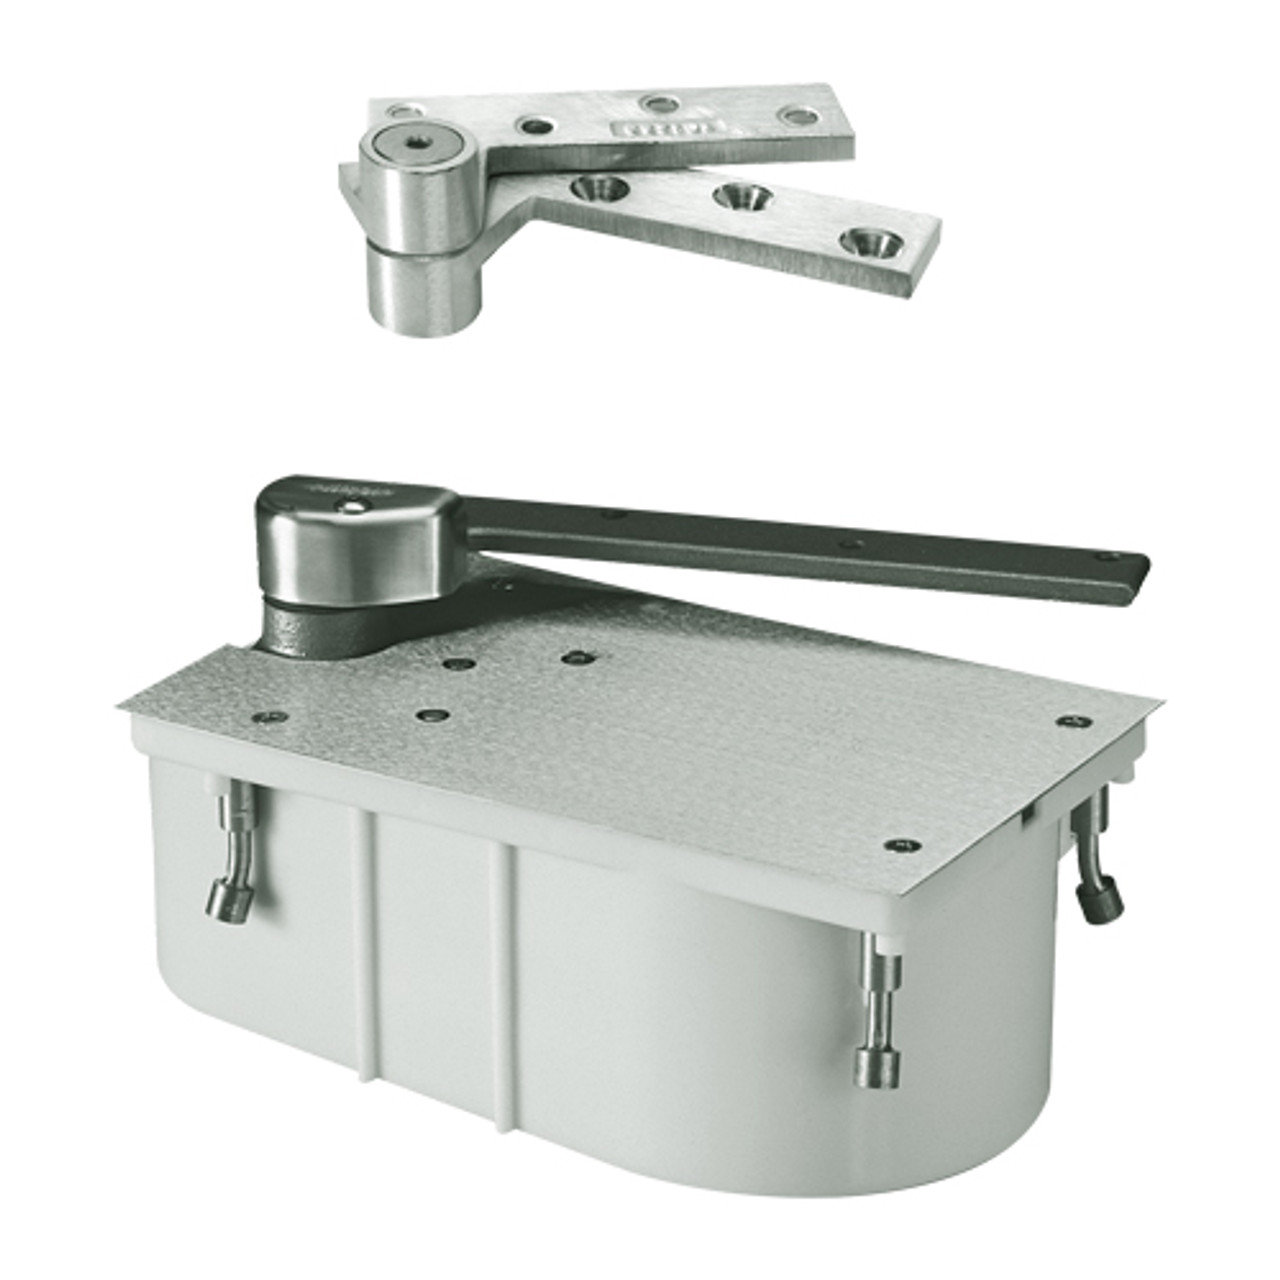 PH27-85N-LH-619 Rixson 27 Series Heavy Duty 3/4" Offset Hung Floor Closer with Physically Handicapped Opening Force in Satin Nickel Finish